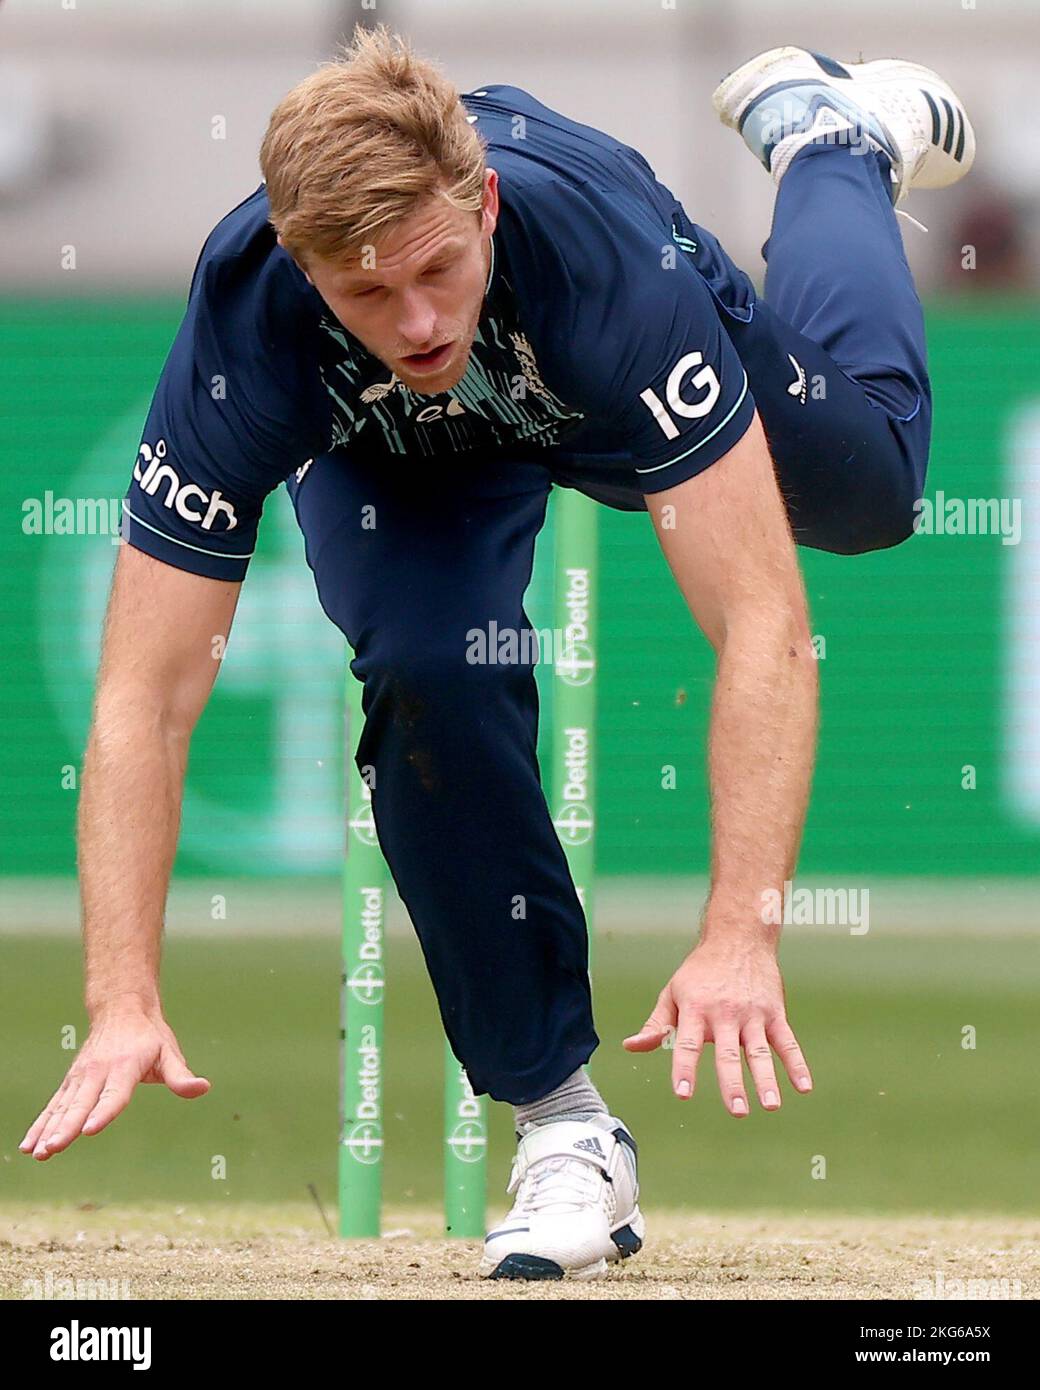 Melbourne, Australia. 22nd Nov, 2022. David Willey of England stumbles after bowling during the Dettol ODI Series match Australia vs England at Melbourne Cricket Ground, Melbourne, Australia, 22nd November 2022 (Photo by Patrick Hoelscher/News Images) Credit: News Images LTD/Alamy Live News Stock Photo